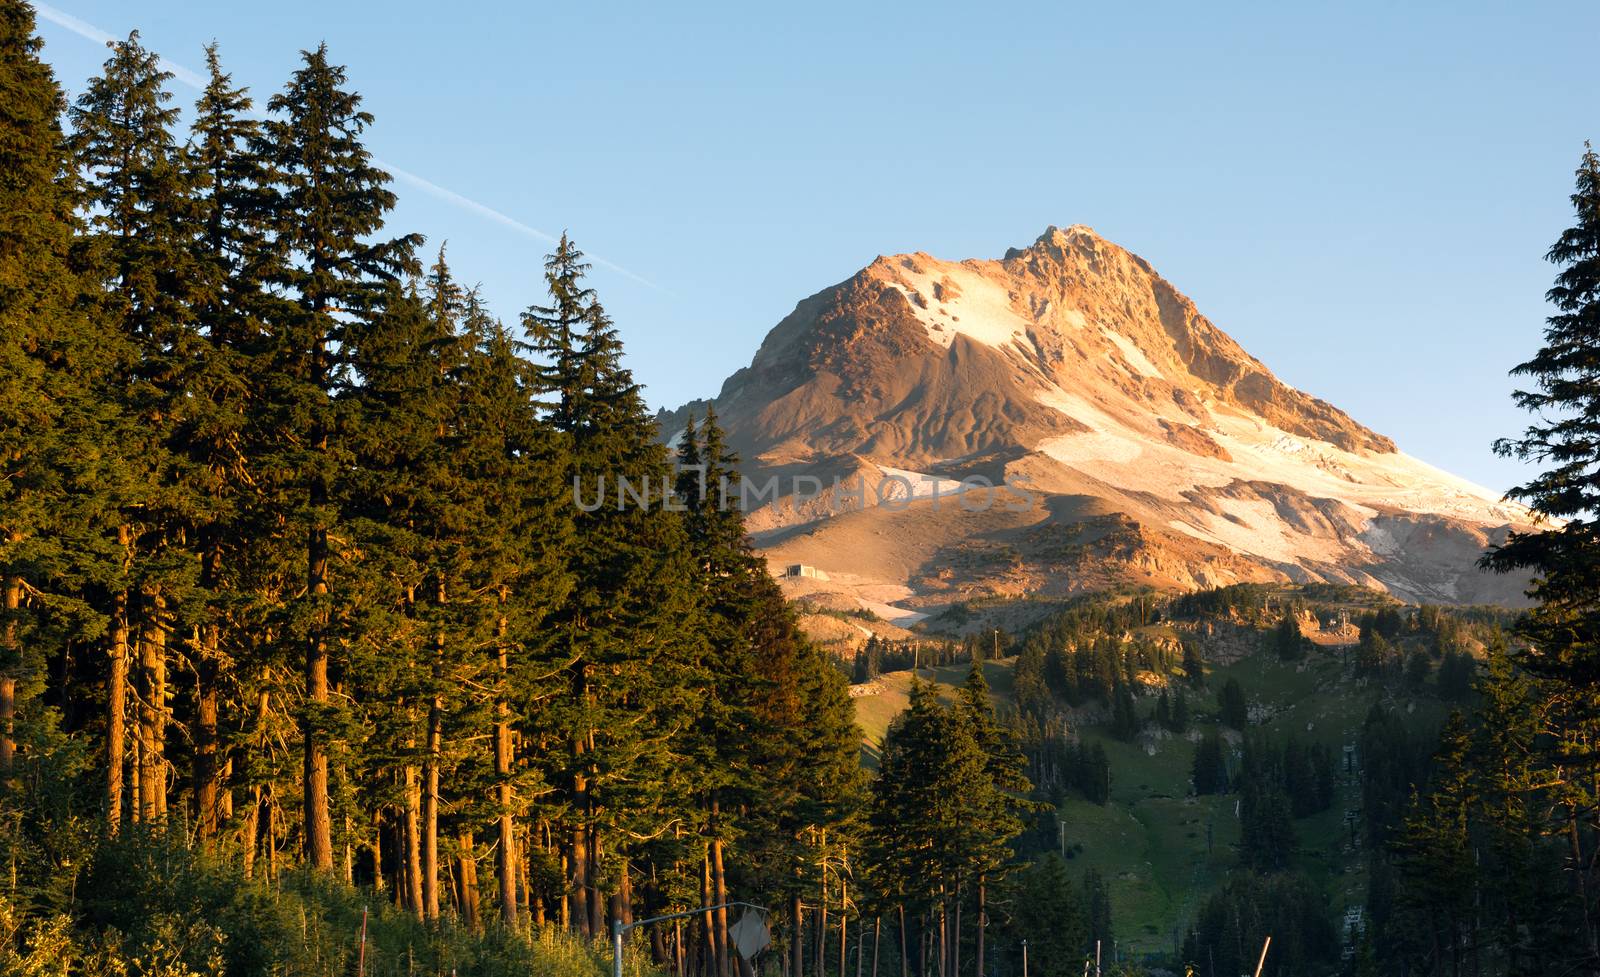 Sunrise comes to the south side of Mount Hood